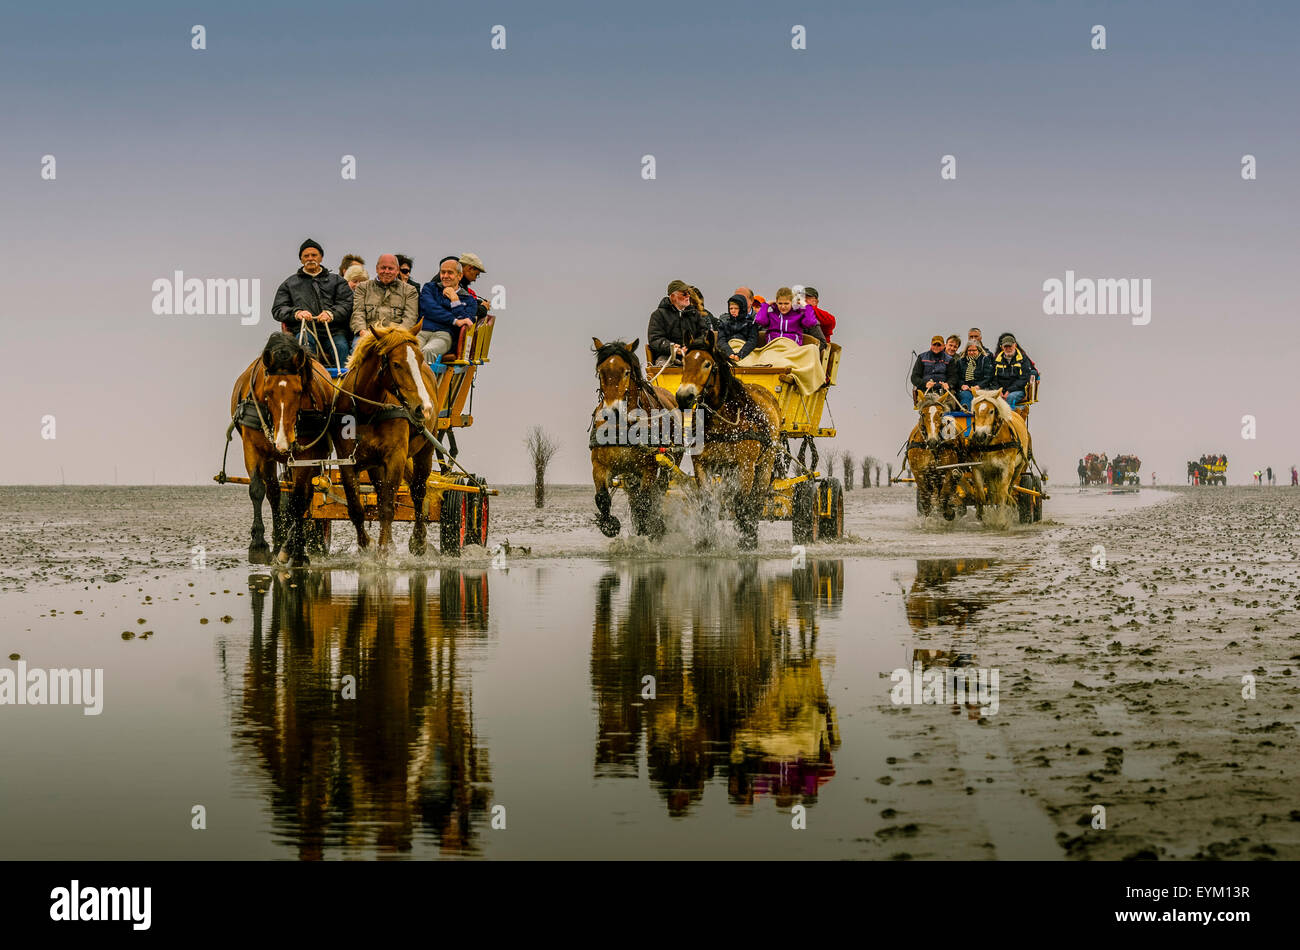 Germany, Lower Saxony, East Friesland, Cuxhaven, new plant, mud flats, wadden sea, carriage, Stock Photo